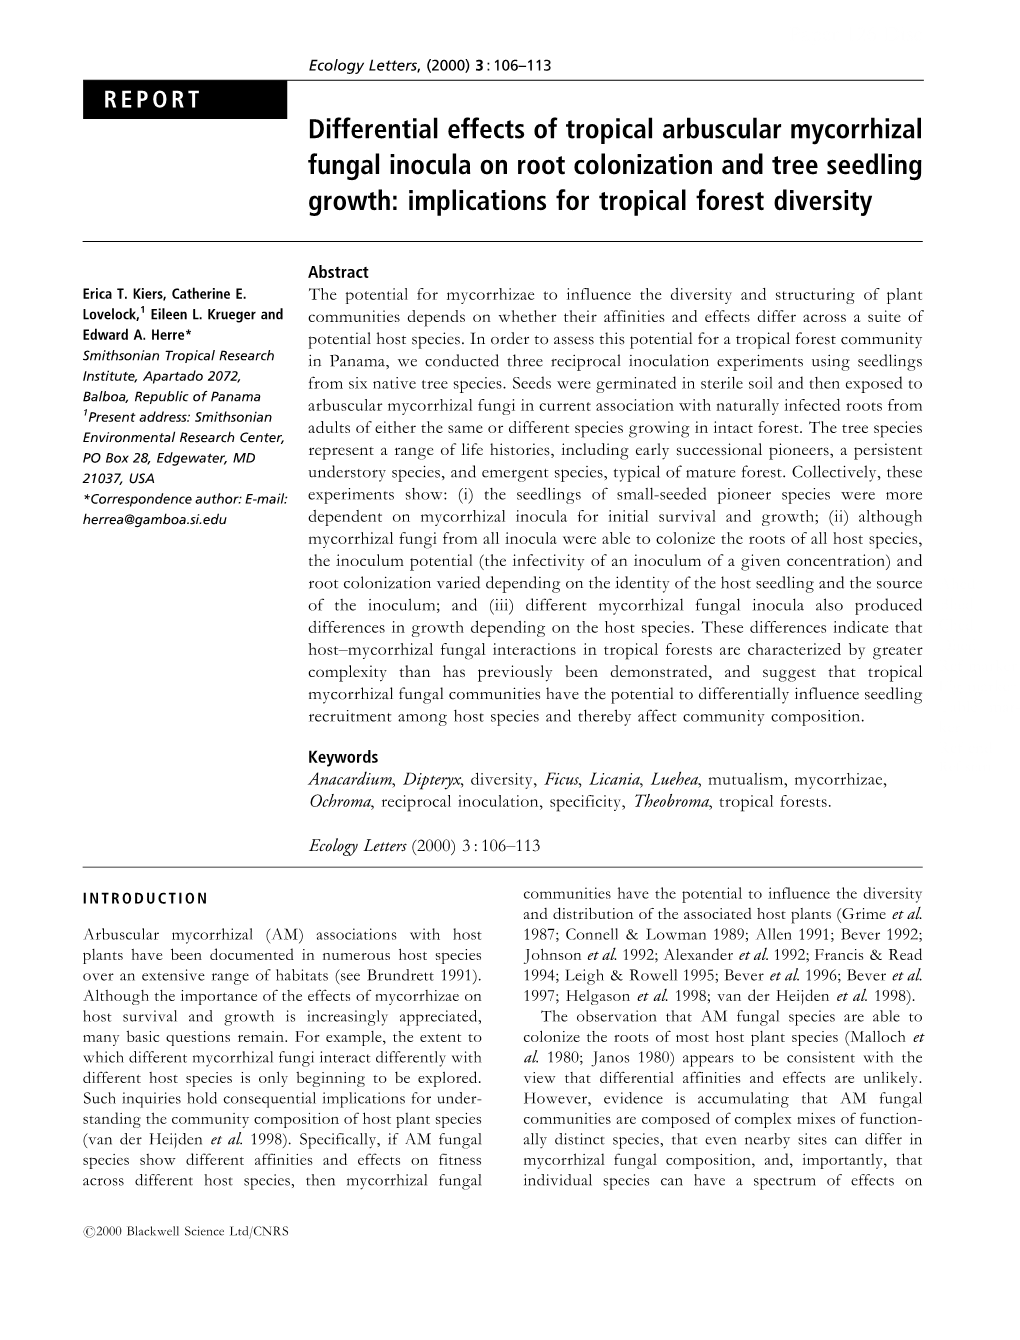 Differential Effects of Tropical Arbuscular Mycorrhizal Fungal Inocula on Root Colonization and Tree Seedling Growth: Implications for Tropical Forest Diversity